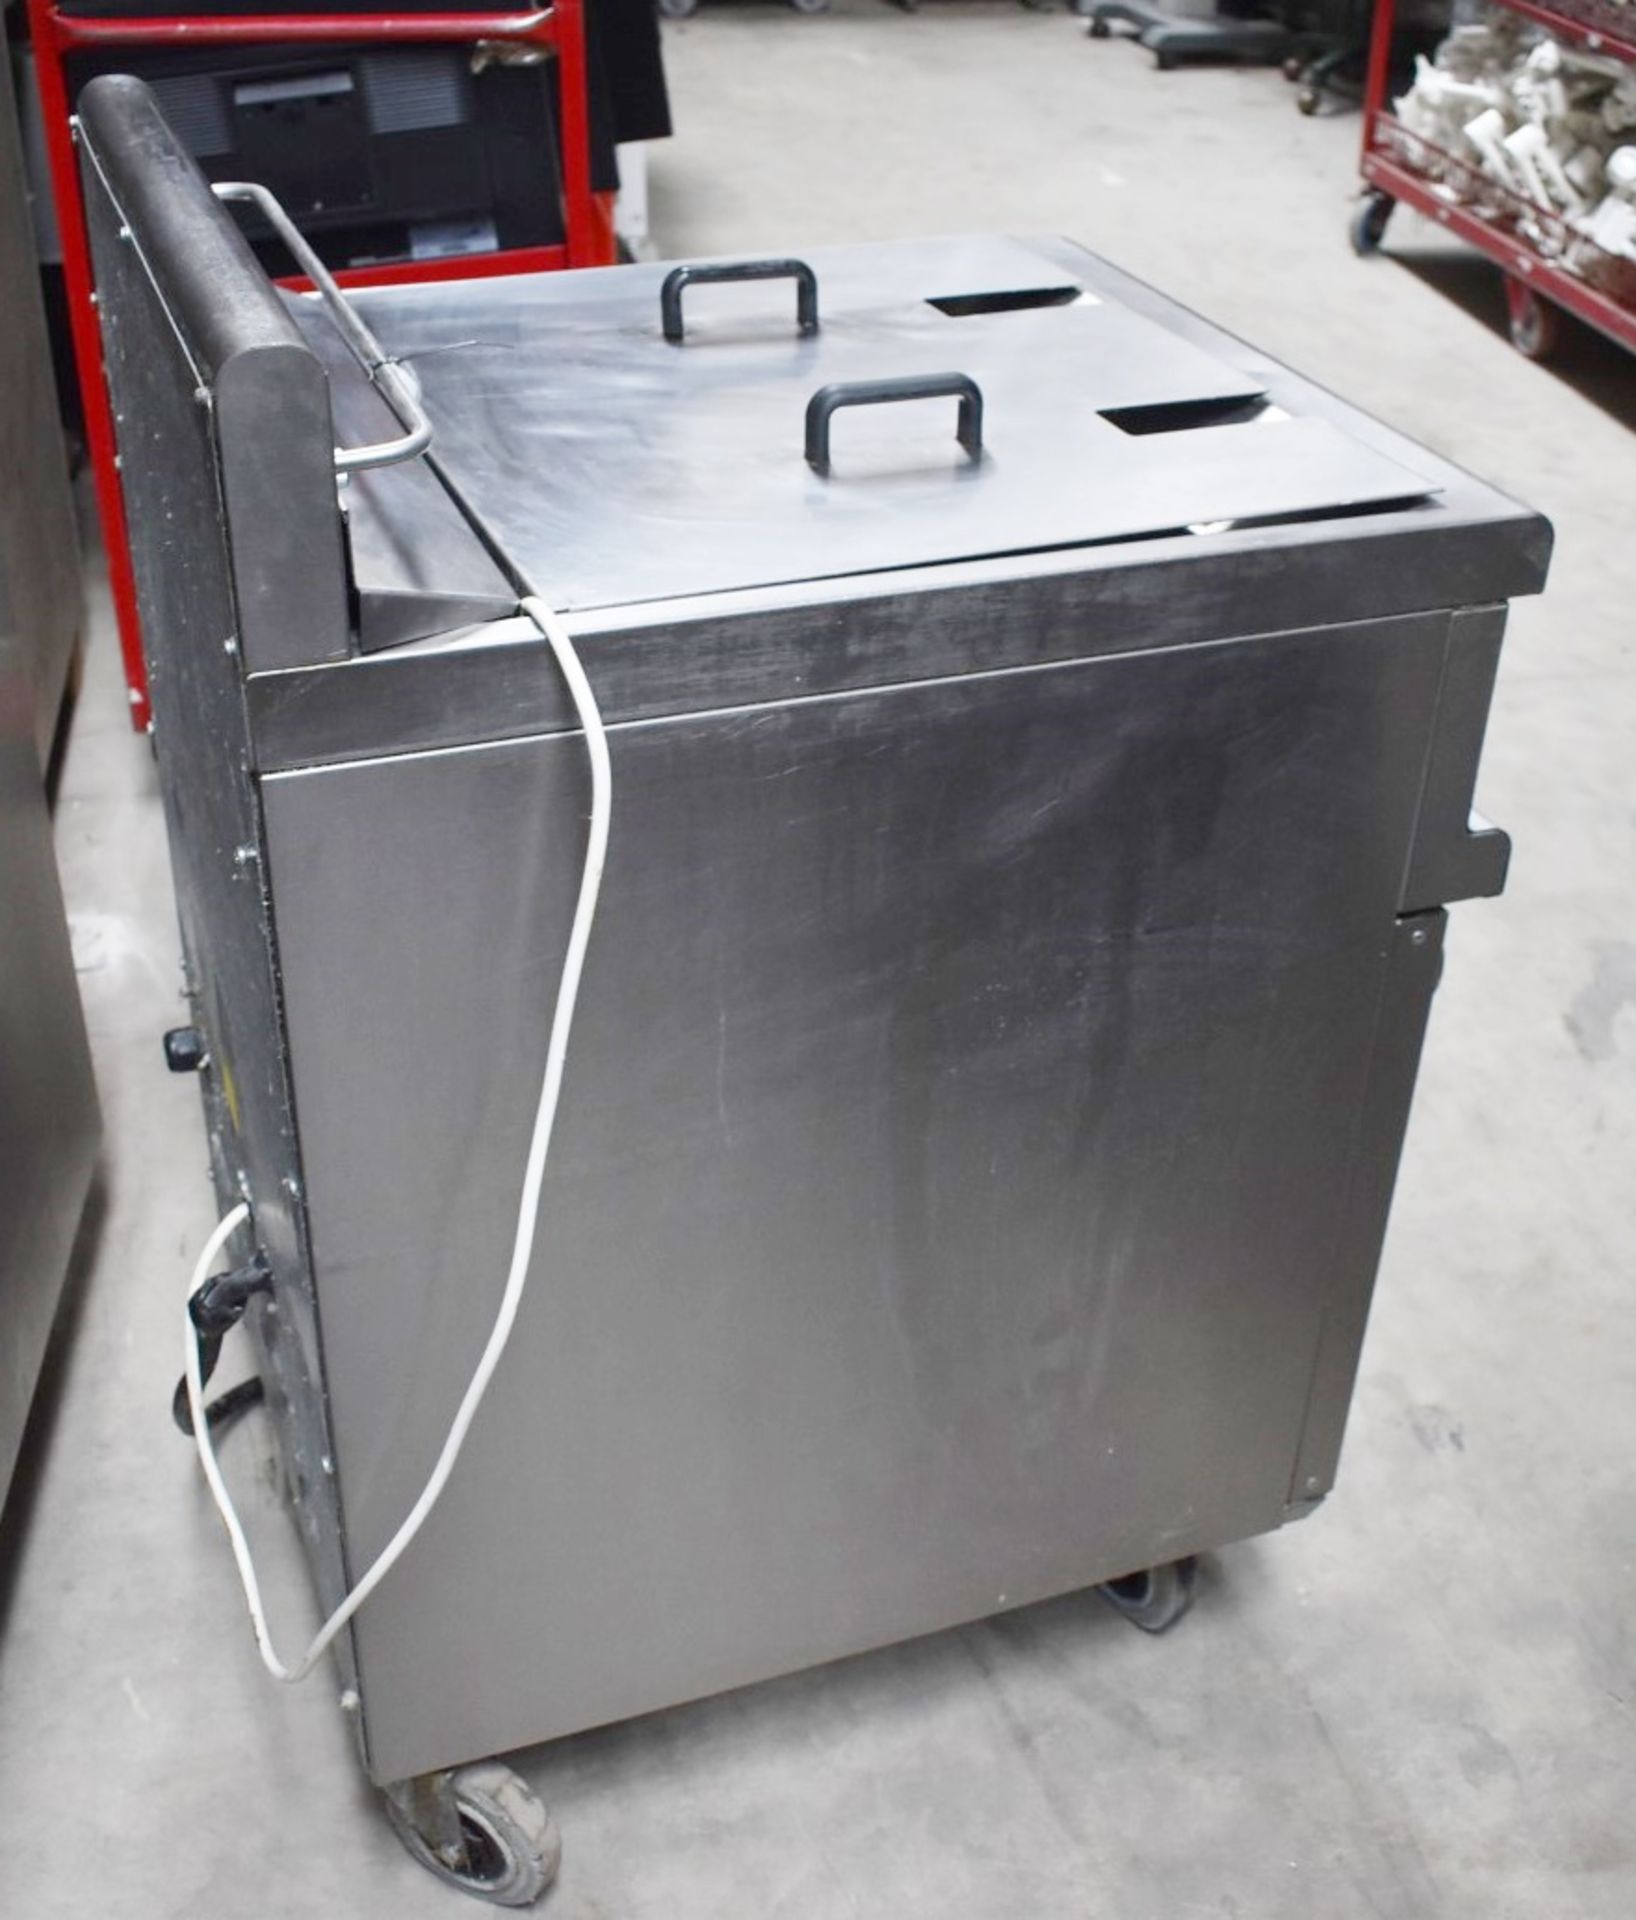 1 x Lincat Opus 700 Single Tank Electric Fryer With Built In Filtration - 3 Phase - Image 2 of 19